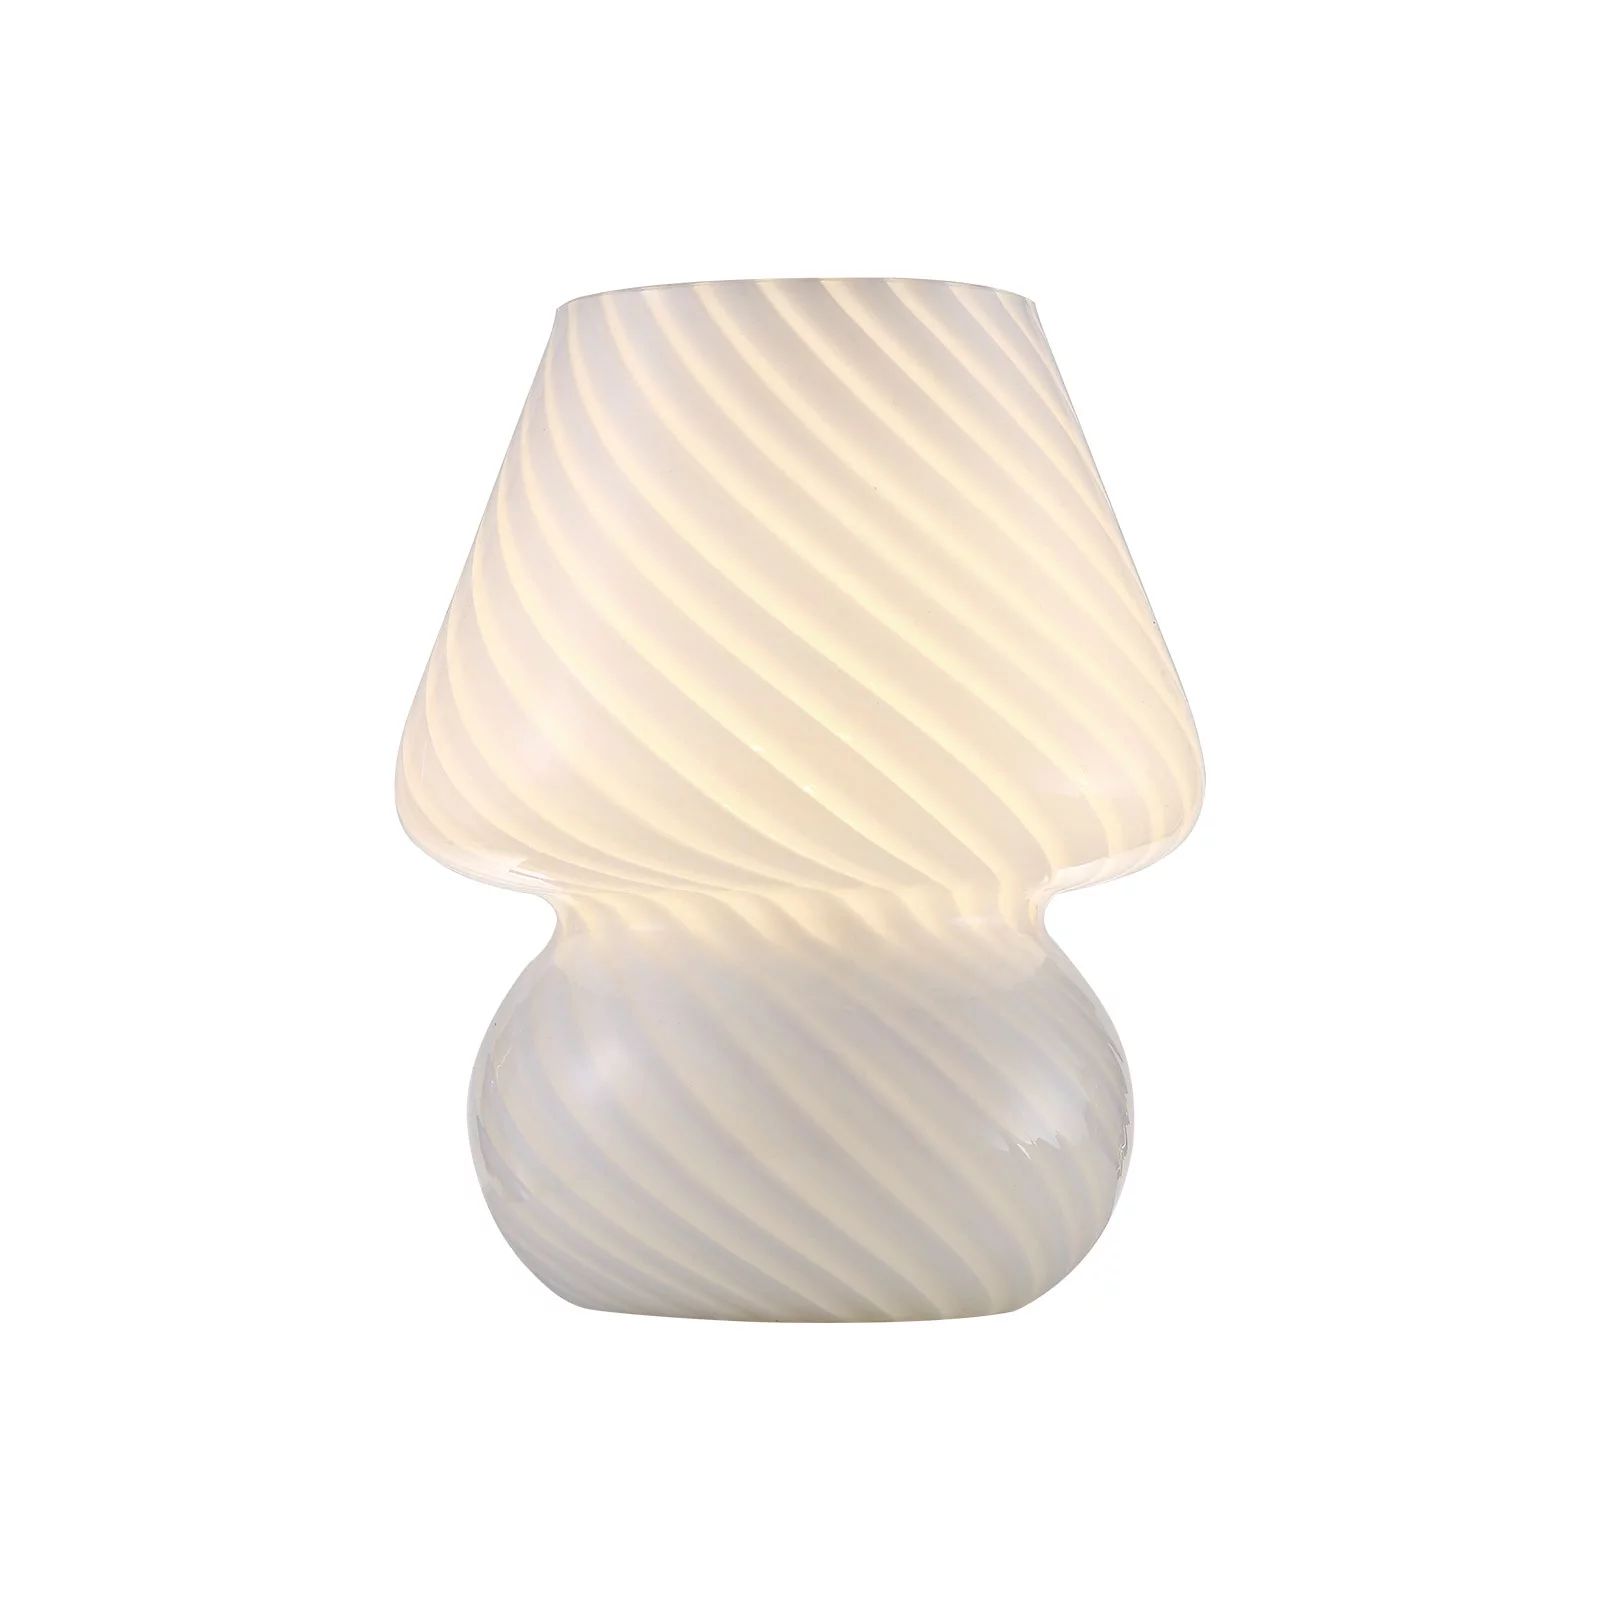 Mushroom Small Table Lamp with Glass Shade White | Walmart (US)